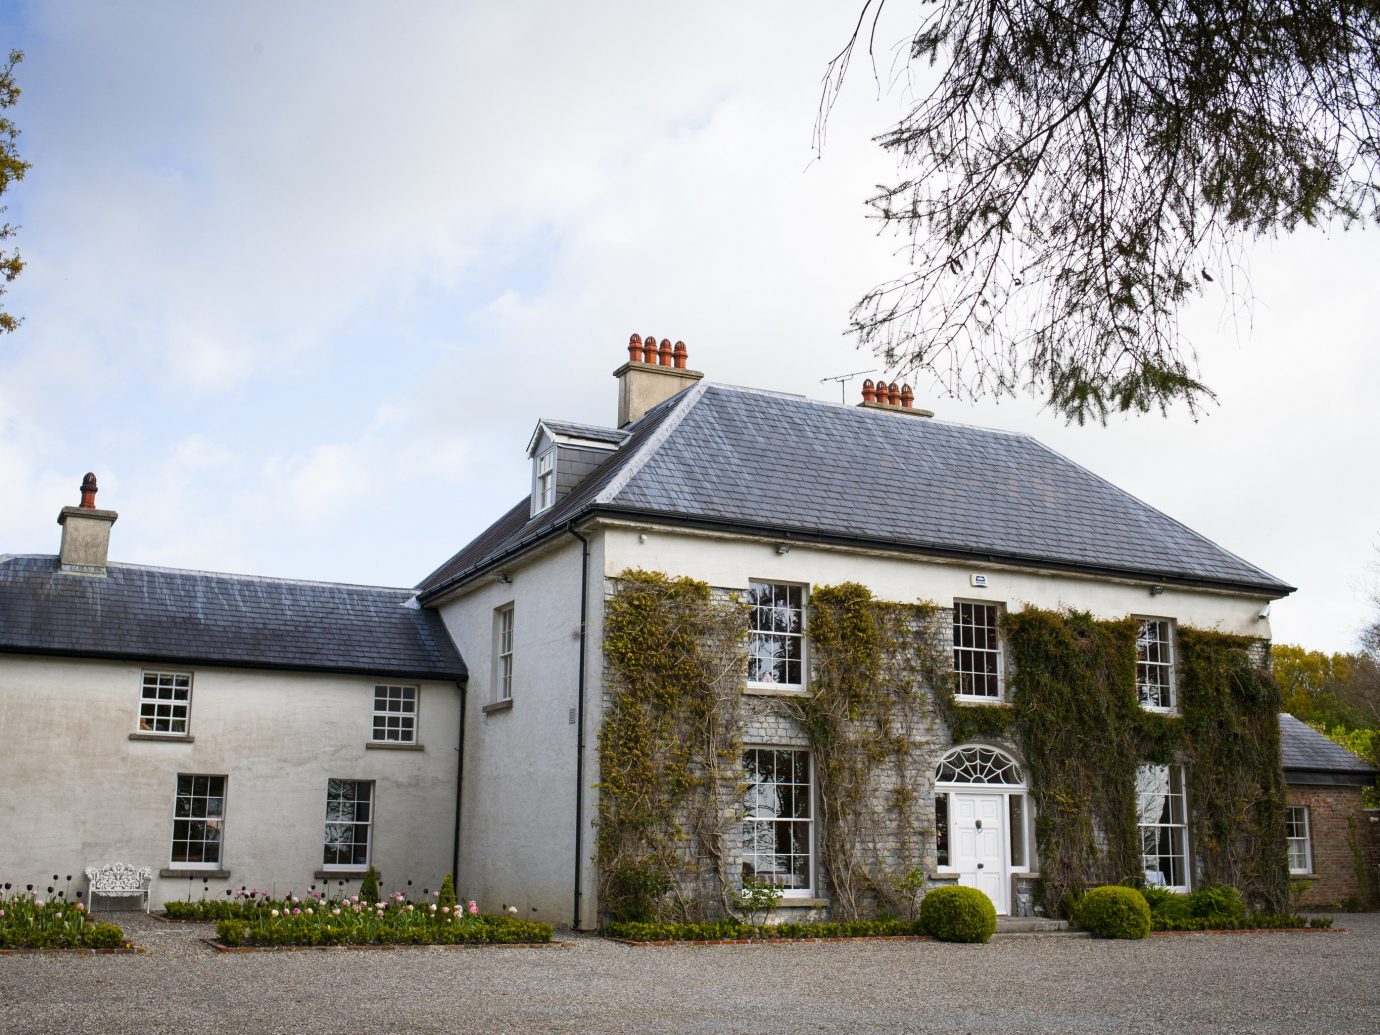 europe Hotels Ireland property house estate home cottage building farmhouse manor house mansion real estate roof facade window château tree sky Villa